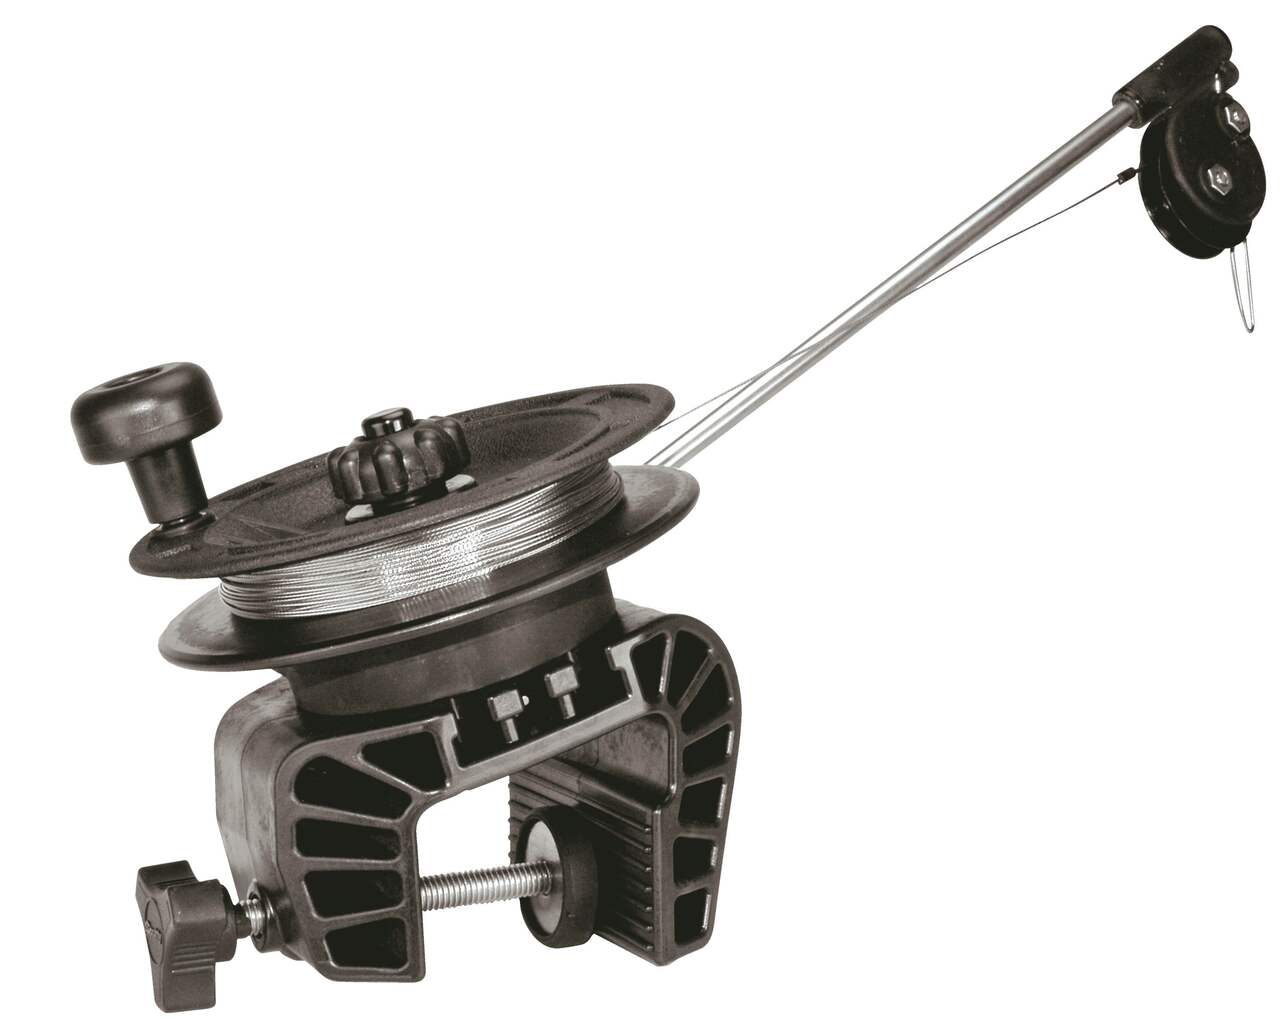 Scotty #1071 Laketroller Downrigger with Portable Clamp Mount